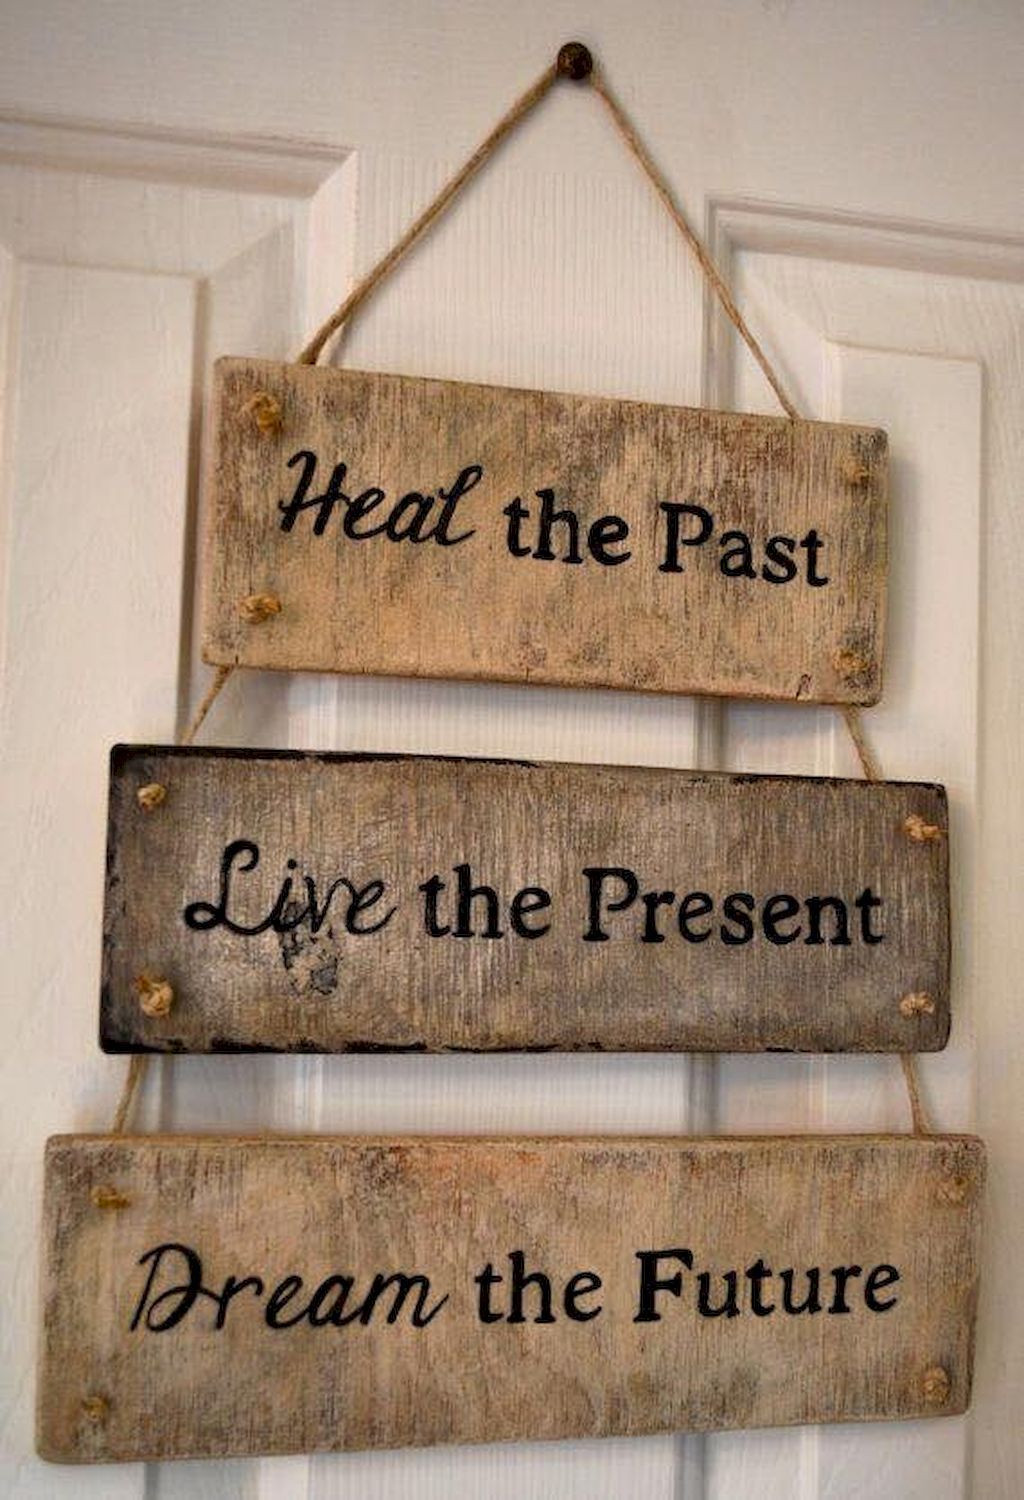 DIY Wood Sign Ideas
 42 Incredibly DIY Wood Sign Ideas with Quotes to Decor